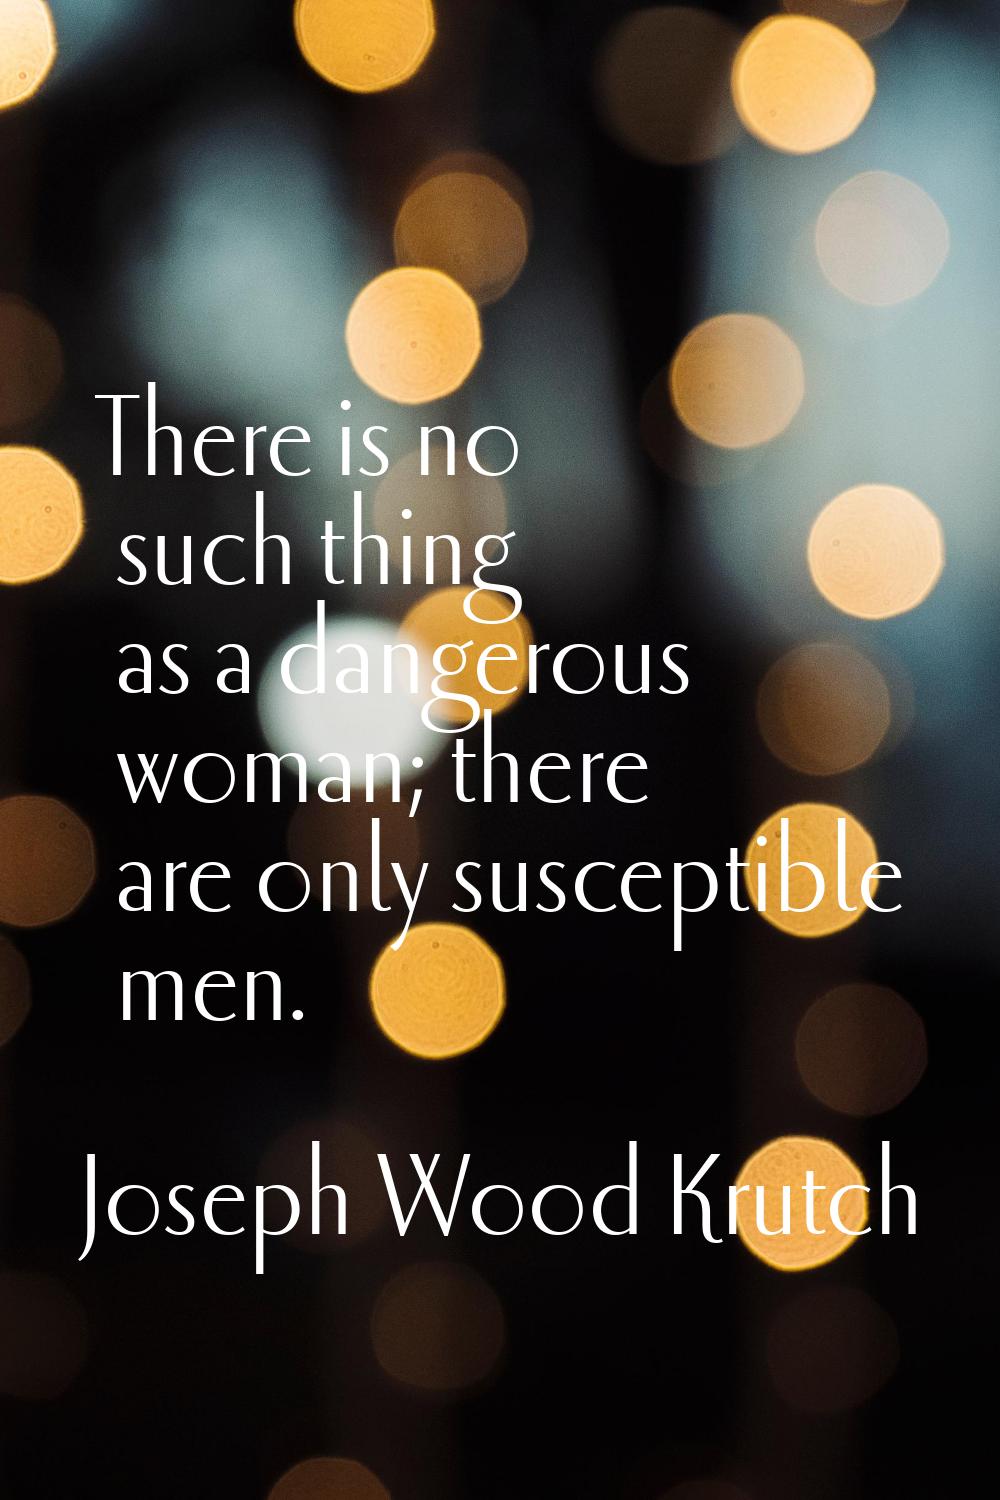 There is no such thing as a dangerous woman; there are only susceptible men.